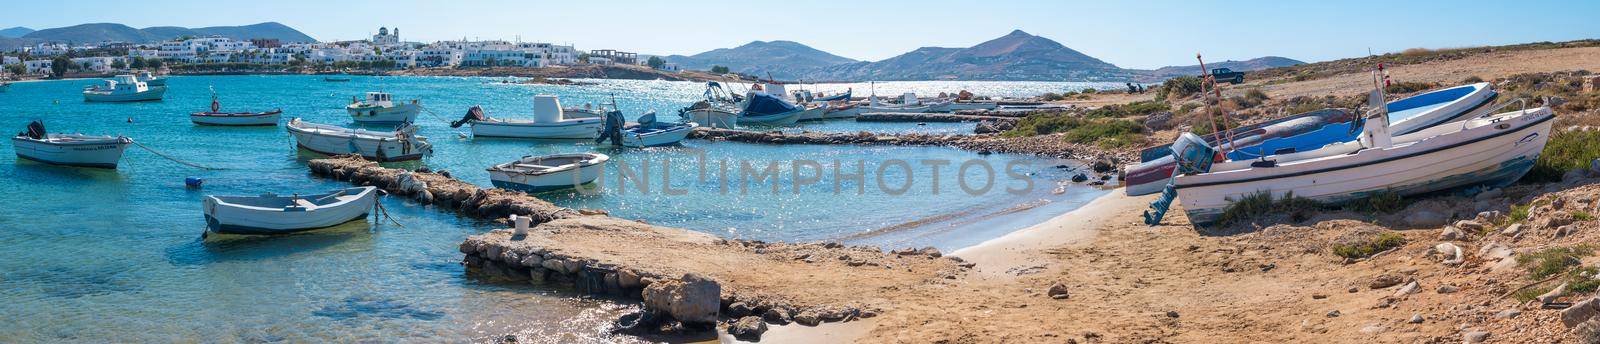 Panoramic view of small fishing boats moored at quiet small stone quay and motorboats on the shore